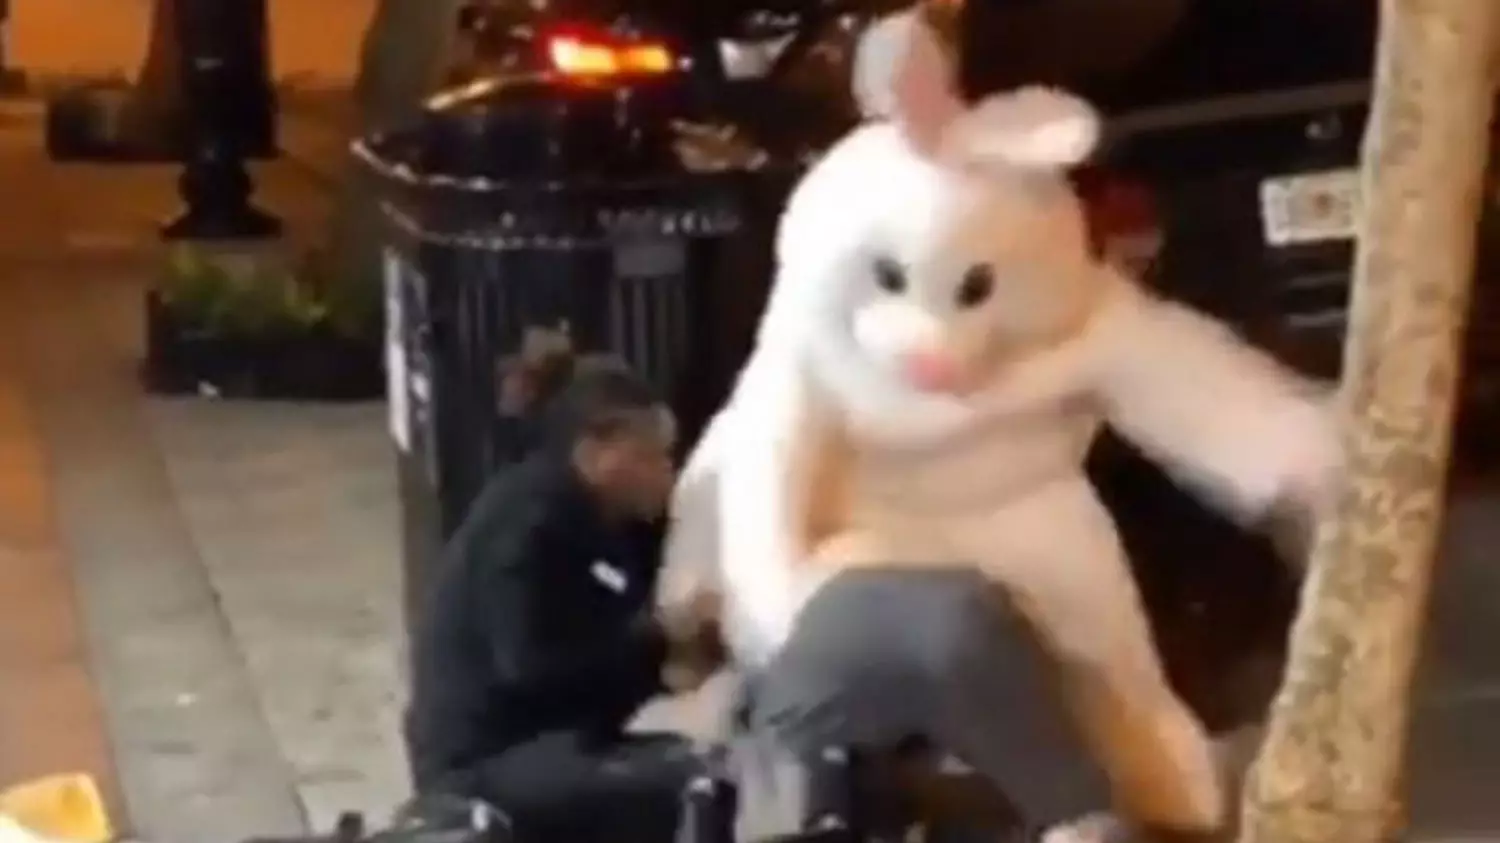 Video Shows Person Dressed As The Easter Bunny In A Brawl